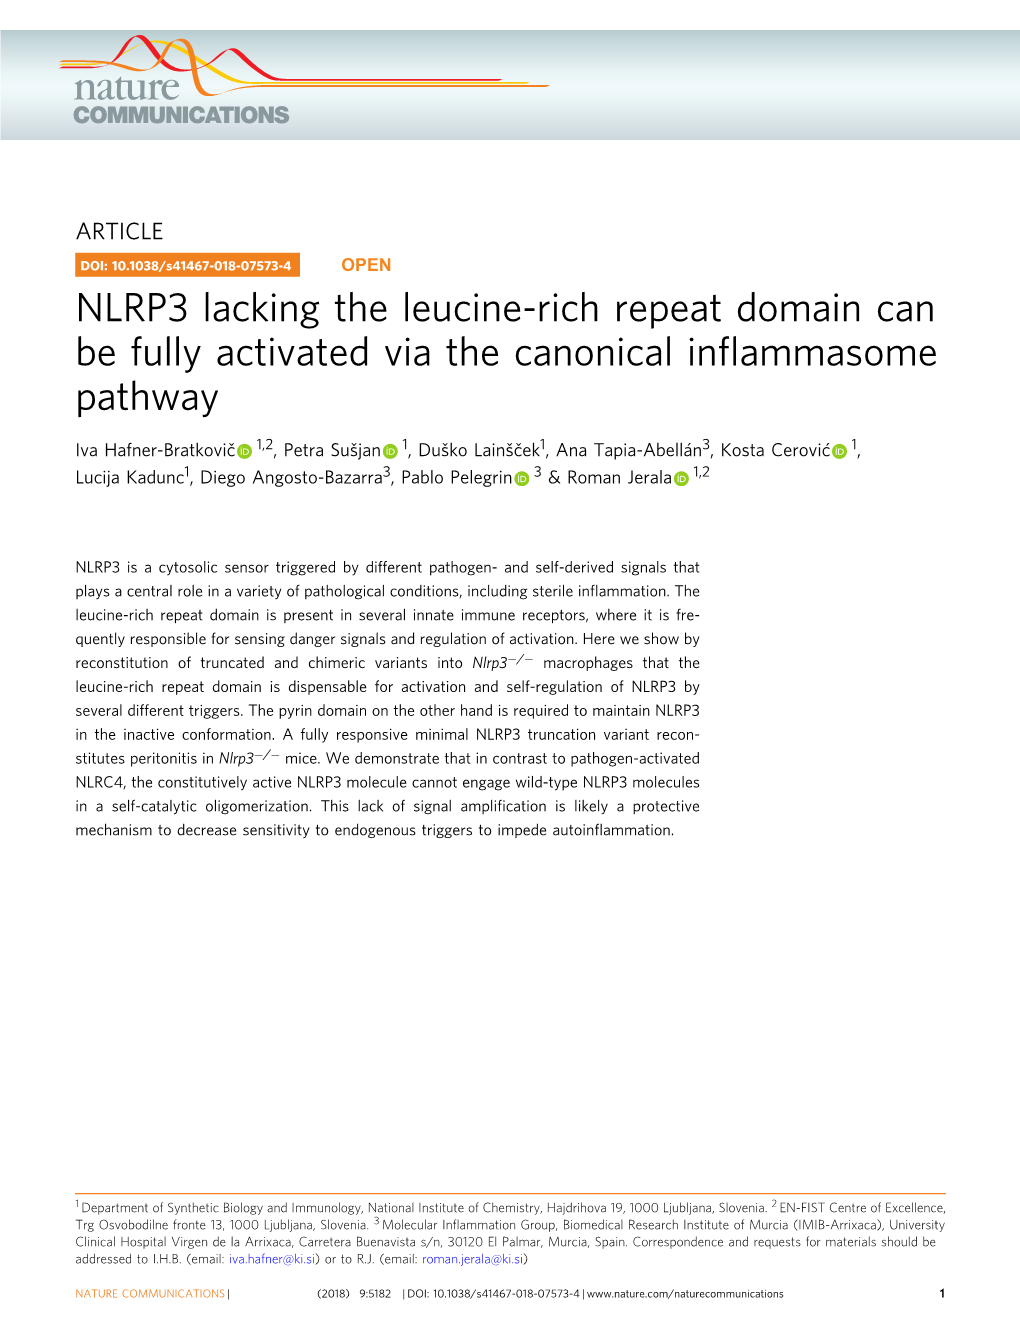 NLRP3 Lacking the Leucine-Rich Repeat Domain Can Be Fully Activated Via the Canonical Inﬂammasome Pathway